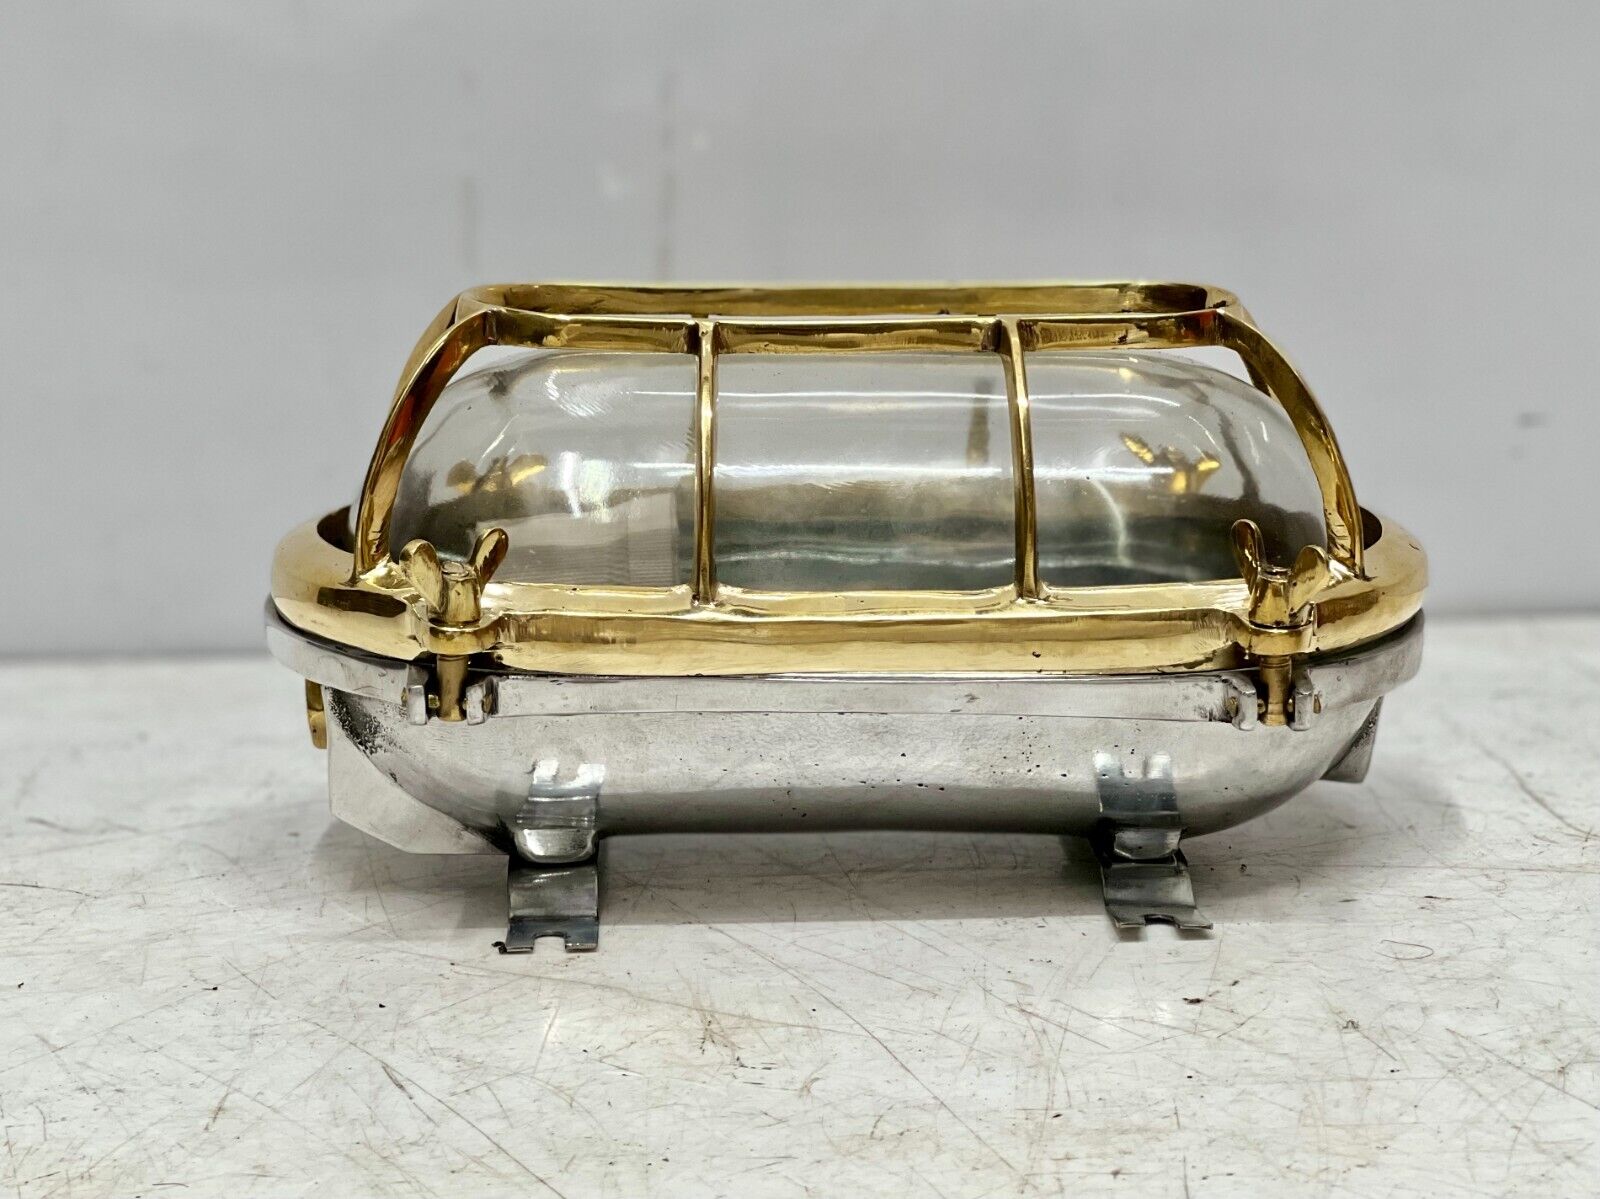 New Antique Style Aluminum Bulkhead With Brass Cage Cover Marine Light Lot of 2